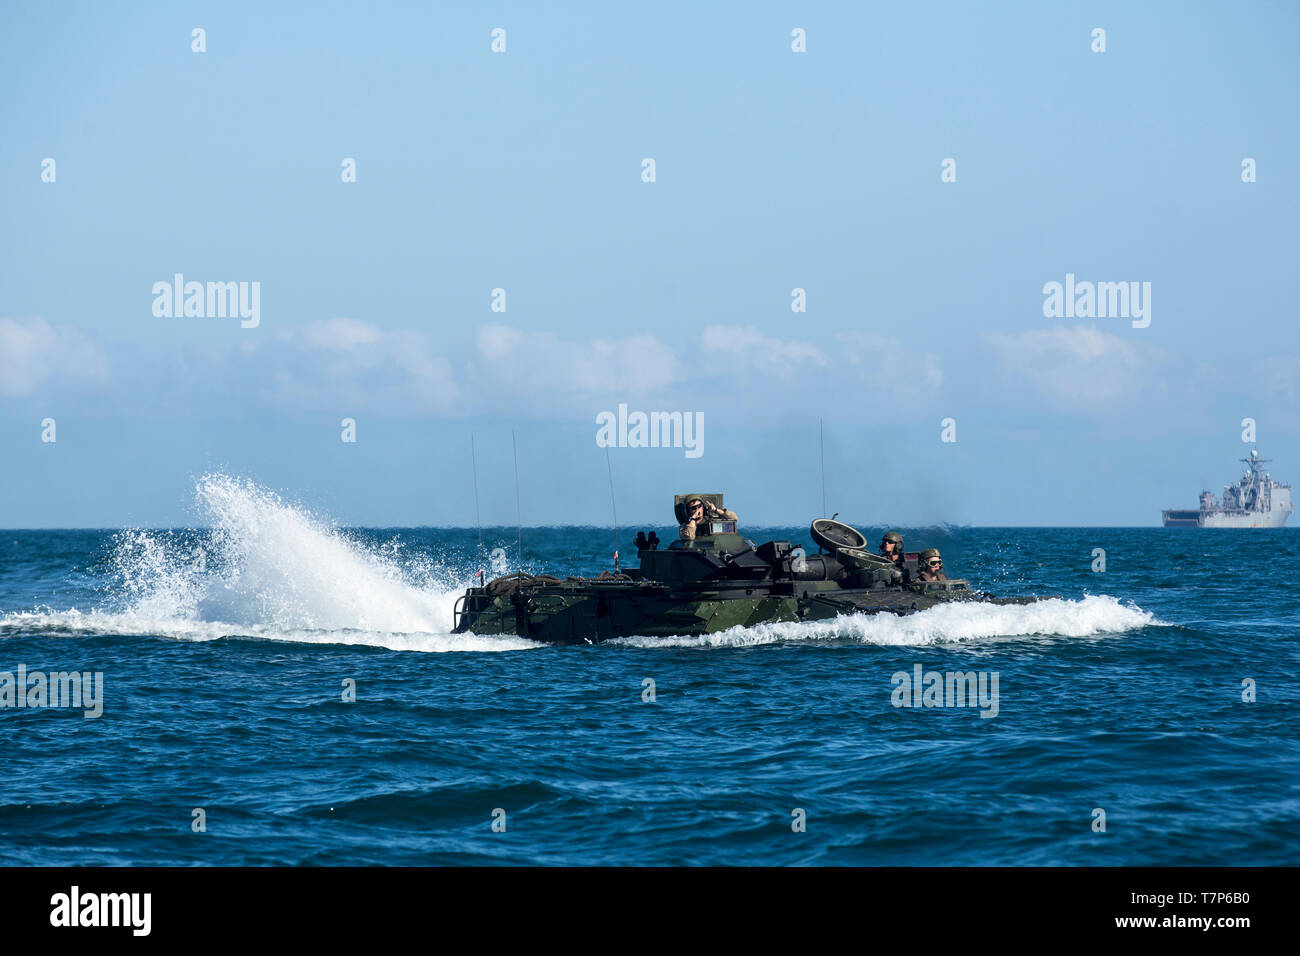 U.S. Marines with 2nd Assault Amphibian Battalion (2nd AAB), 2nd Marine Division, move into an assault formation on Camp Lejeune, N.C., May 1, 2019. Marines with 2nd AAB conducted Ship-to-Shore exercises in support of training for the crew of the USS Carter Hall. (U.S. Marine Corps photo by Lance Cpl. Tyler M. Solak) Stock Photo